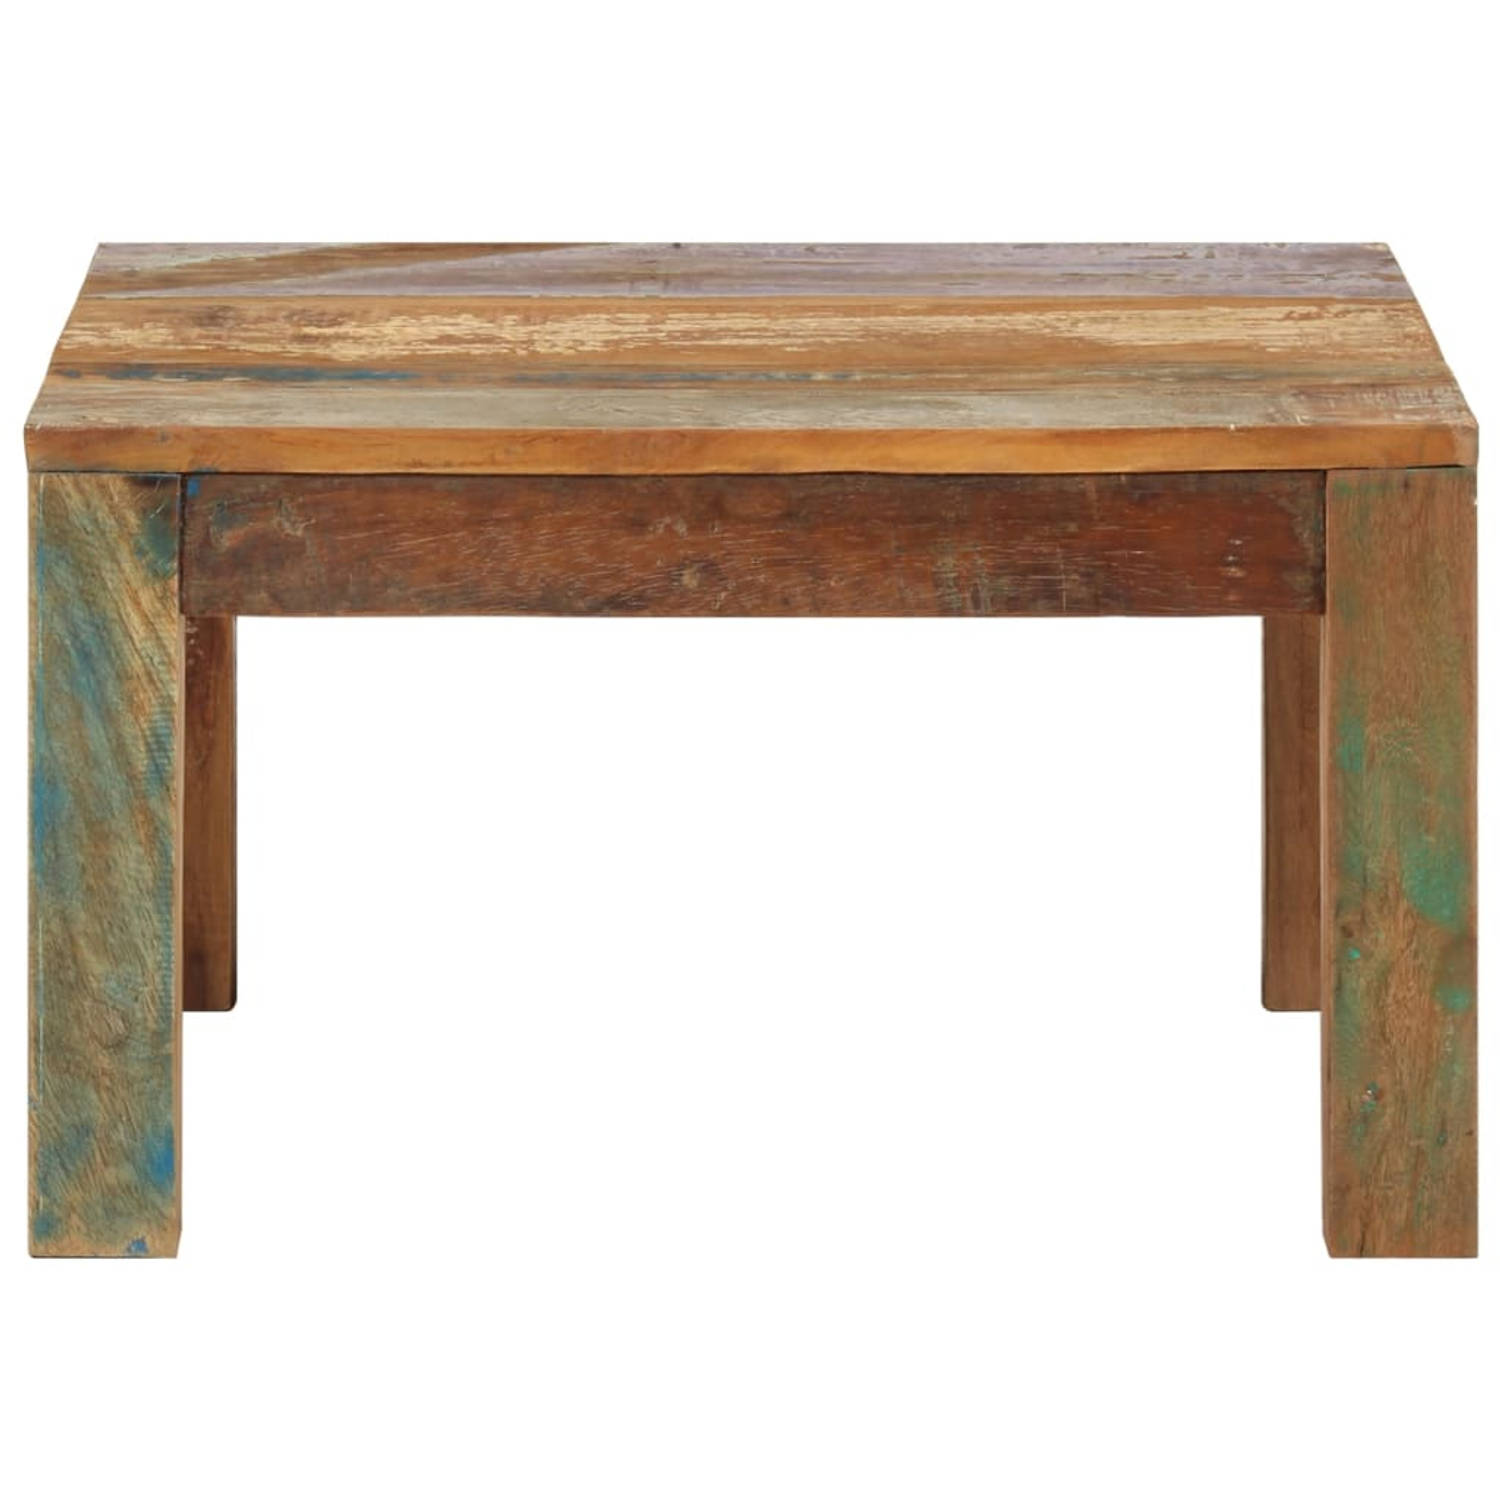 The Living Store Banktafel Massief gerecycled hout 60 x 60 x 35 cm